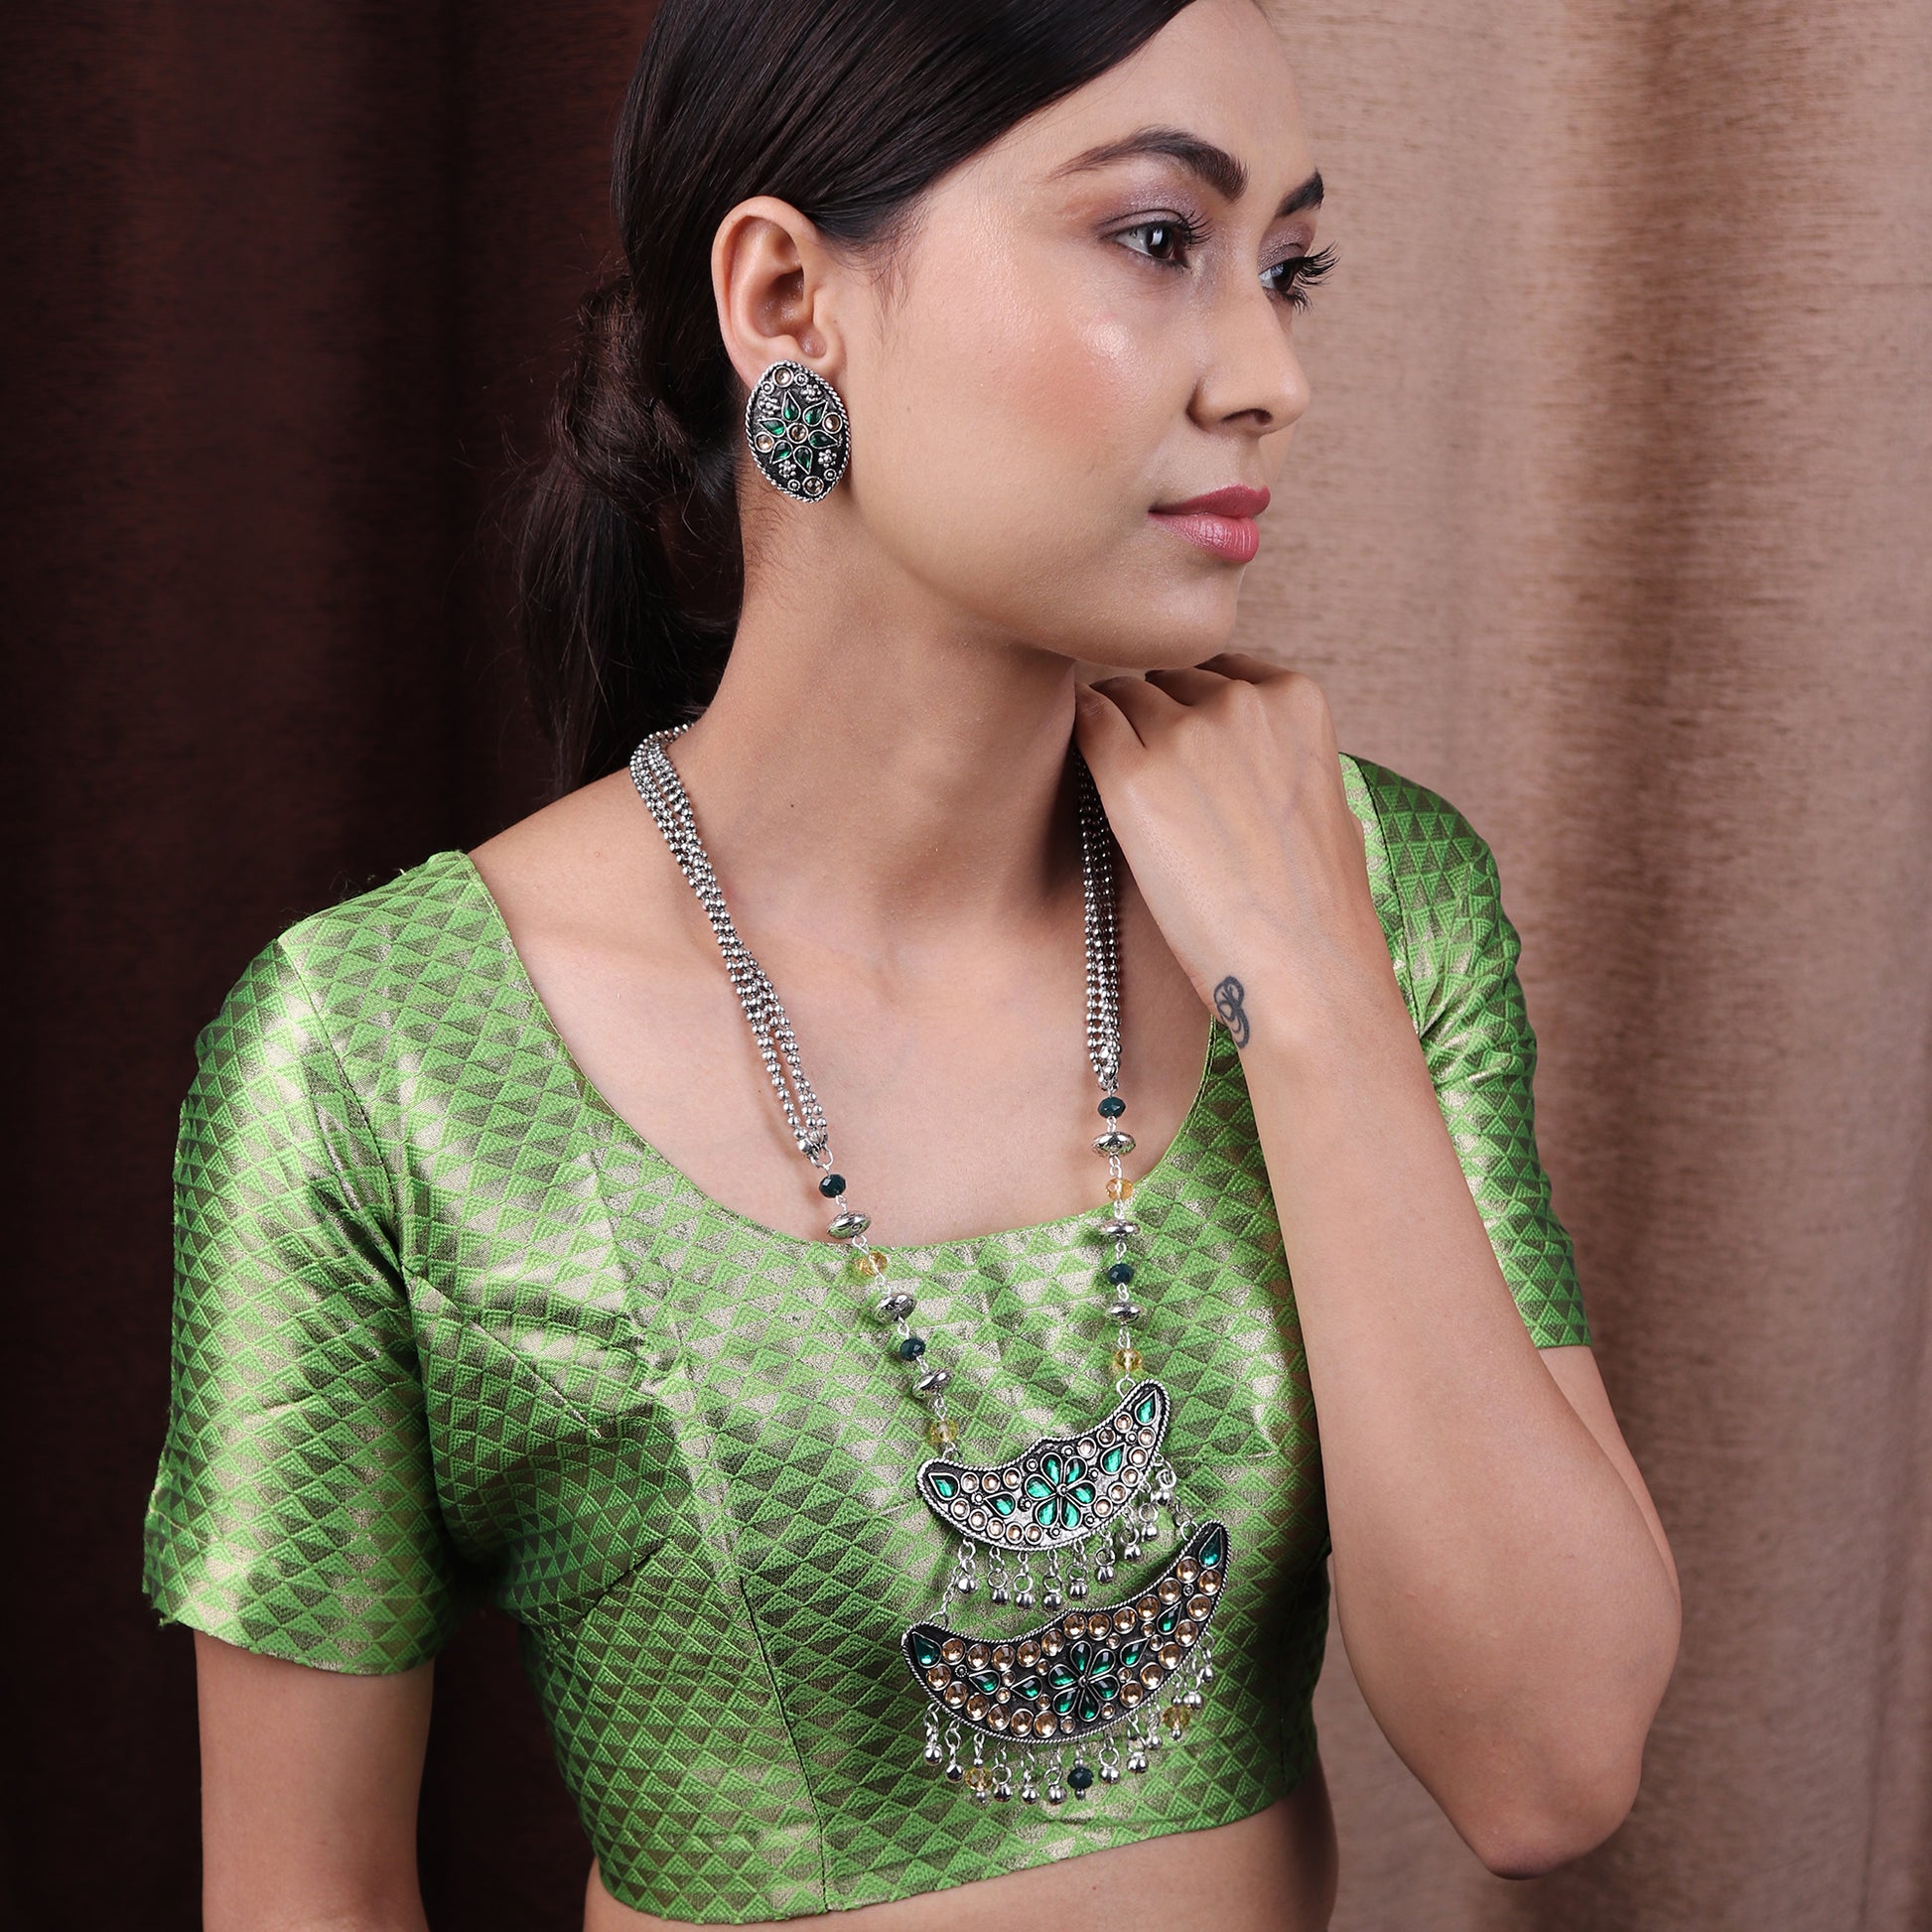 Necklace Set,The layered Moon Afghani Necklace set in Green & Cream - Cippele Multi Store